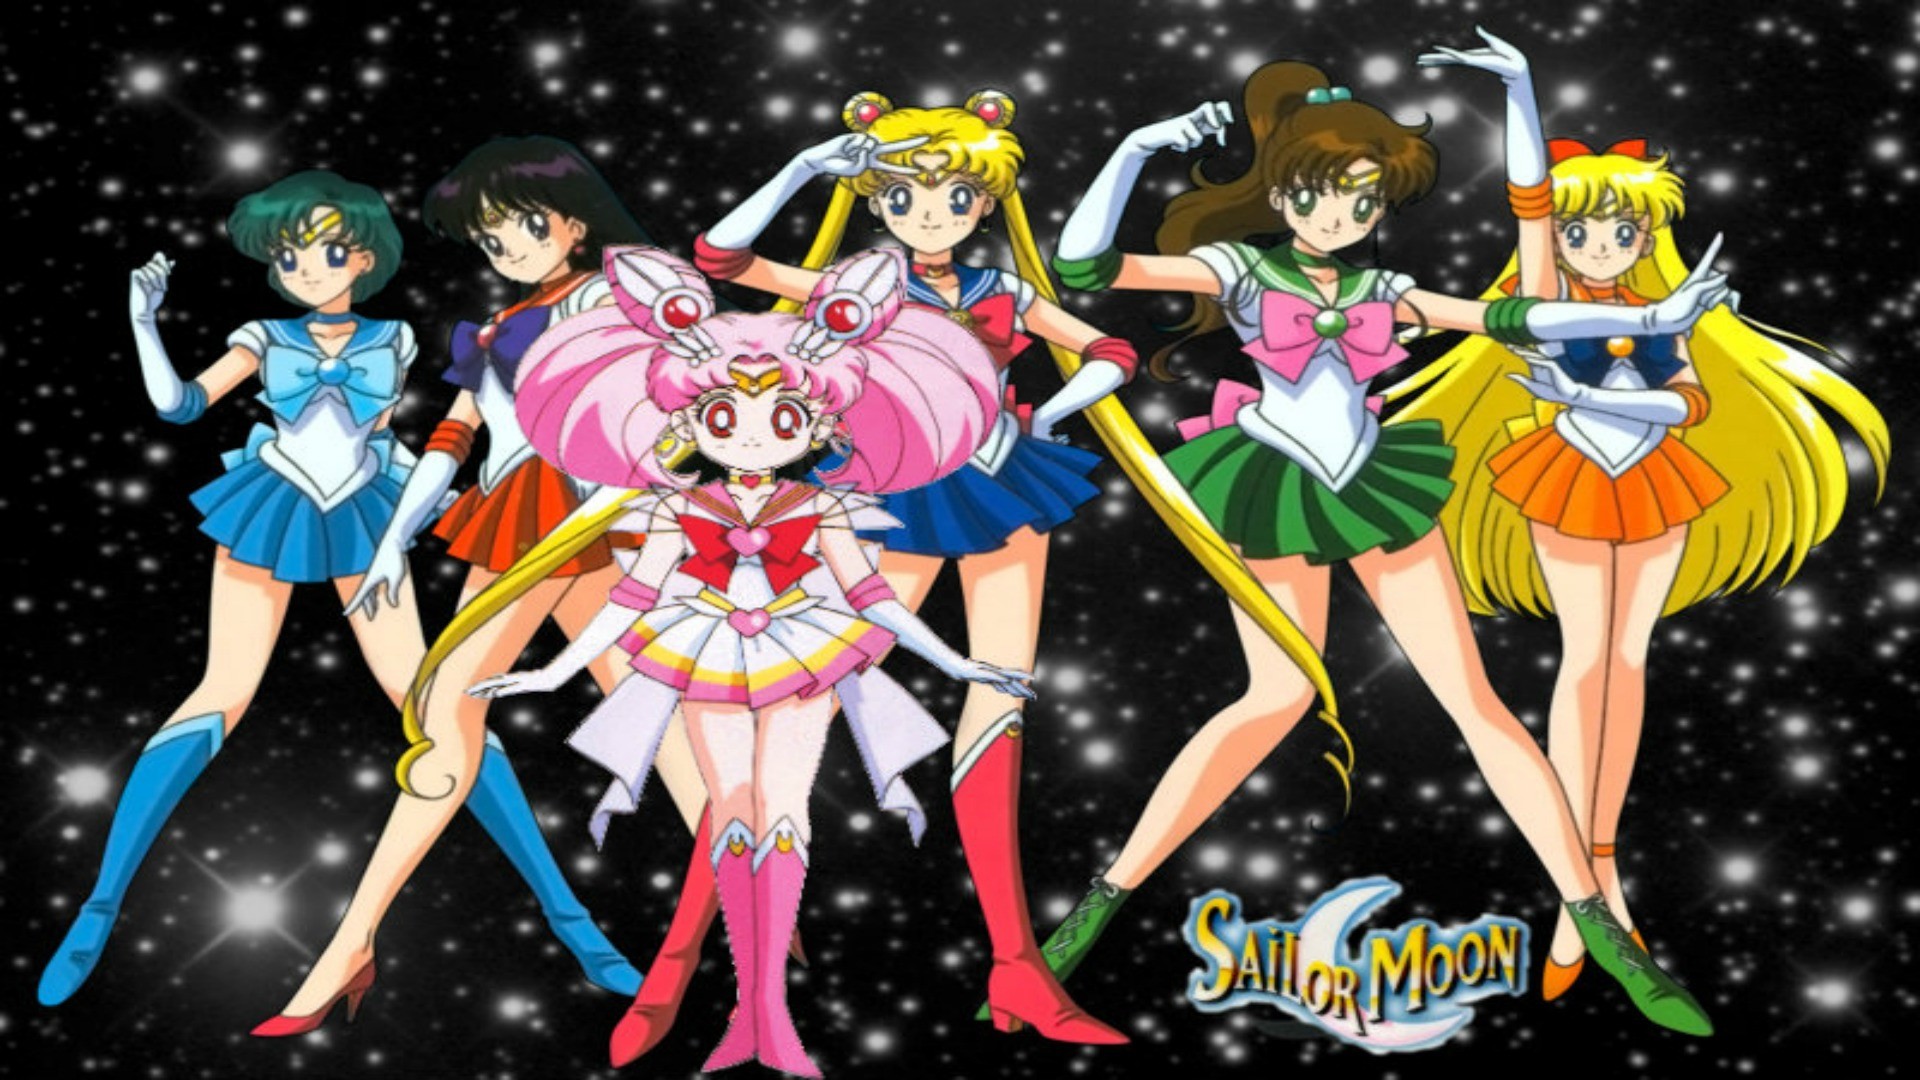 1920x1080  Sailor Moon One. How to set wallpaper on your desktop? Click the  download link from above and set the wallpaper on the desktop from your OS.